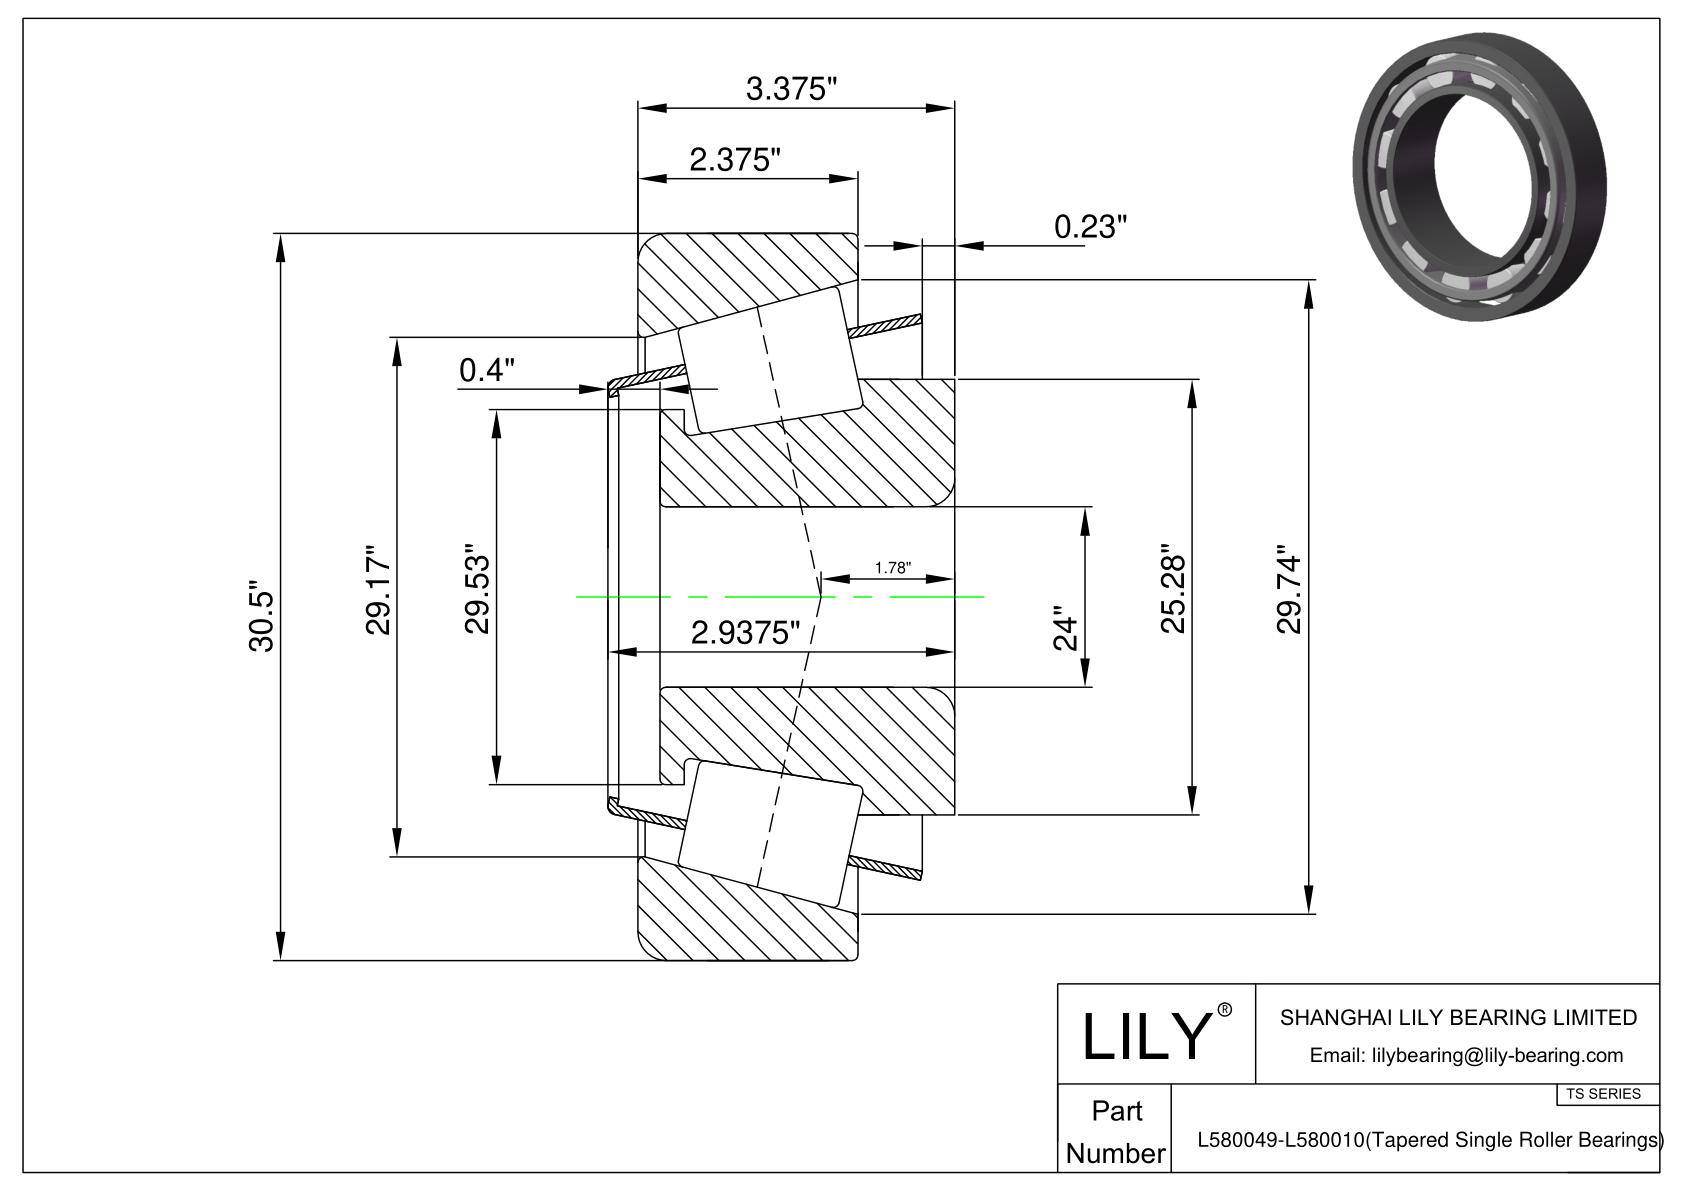 L580049-L580010 TS (Tapered Single Roller Bearings) (Imperial) cad drawing